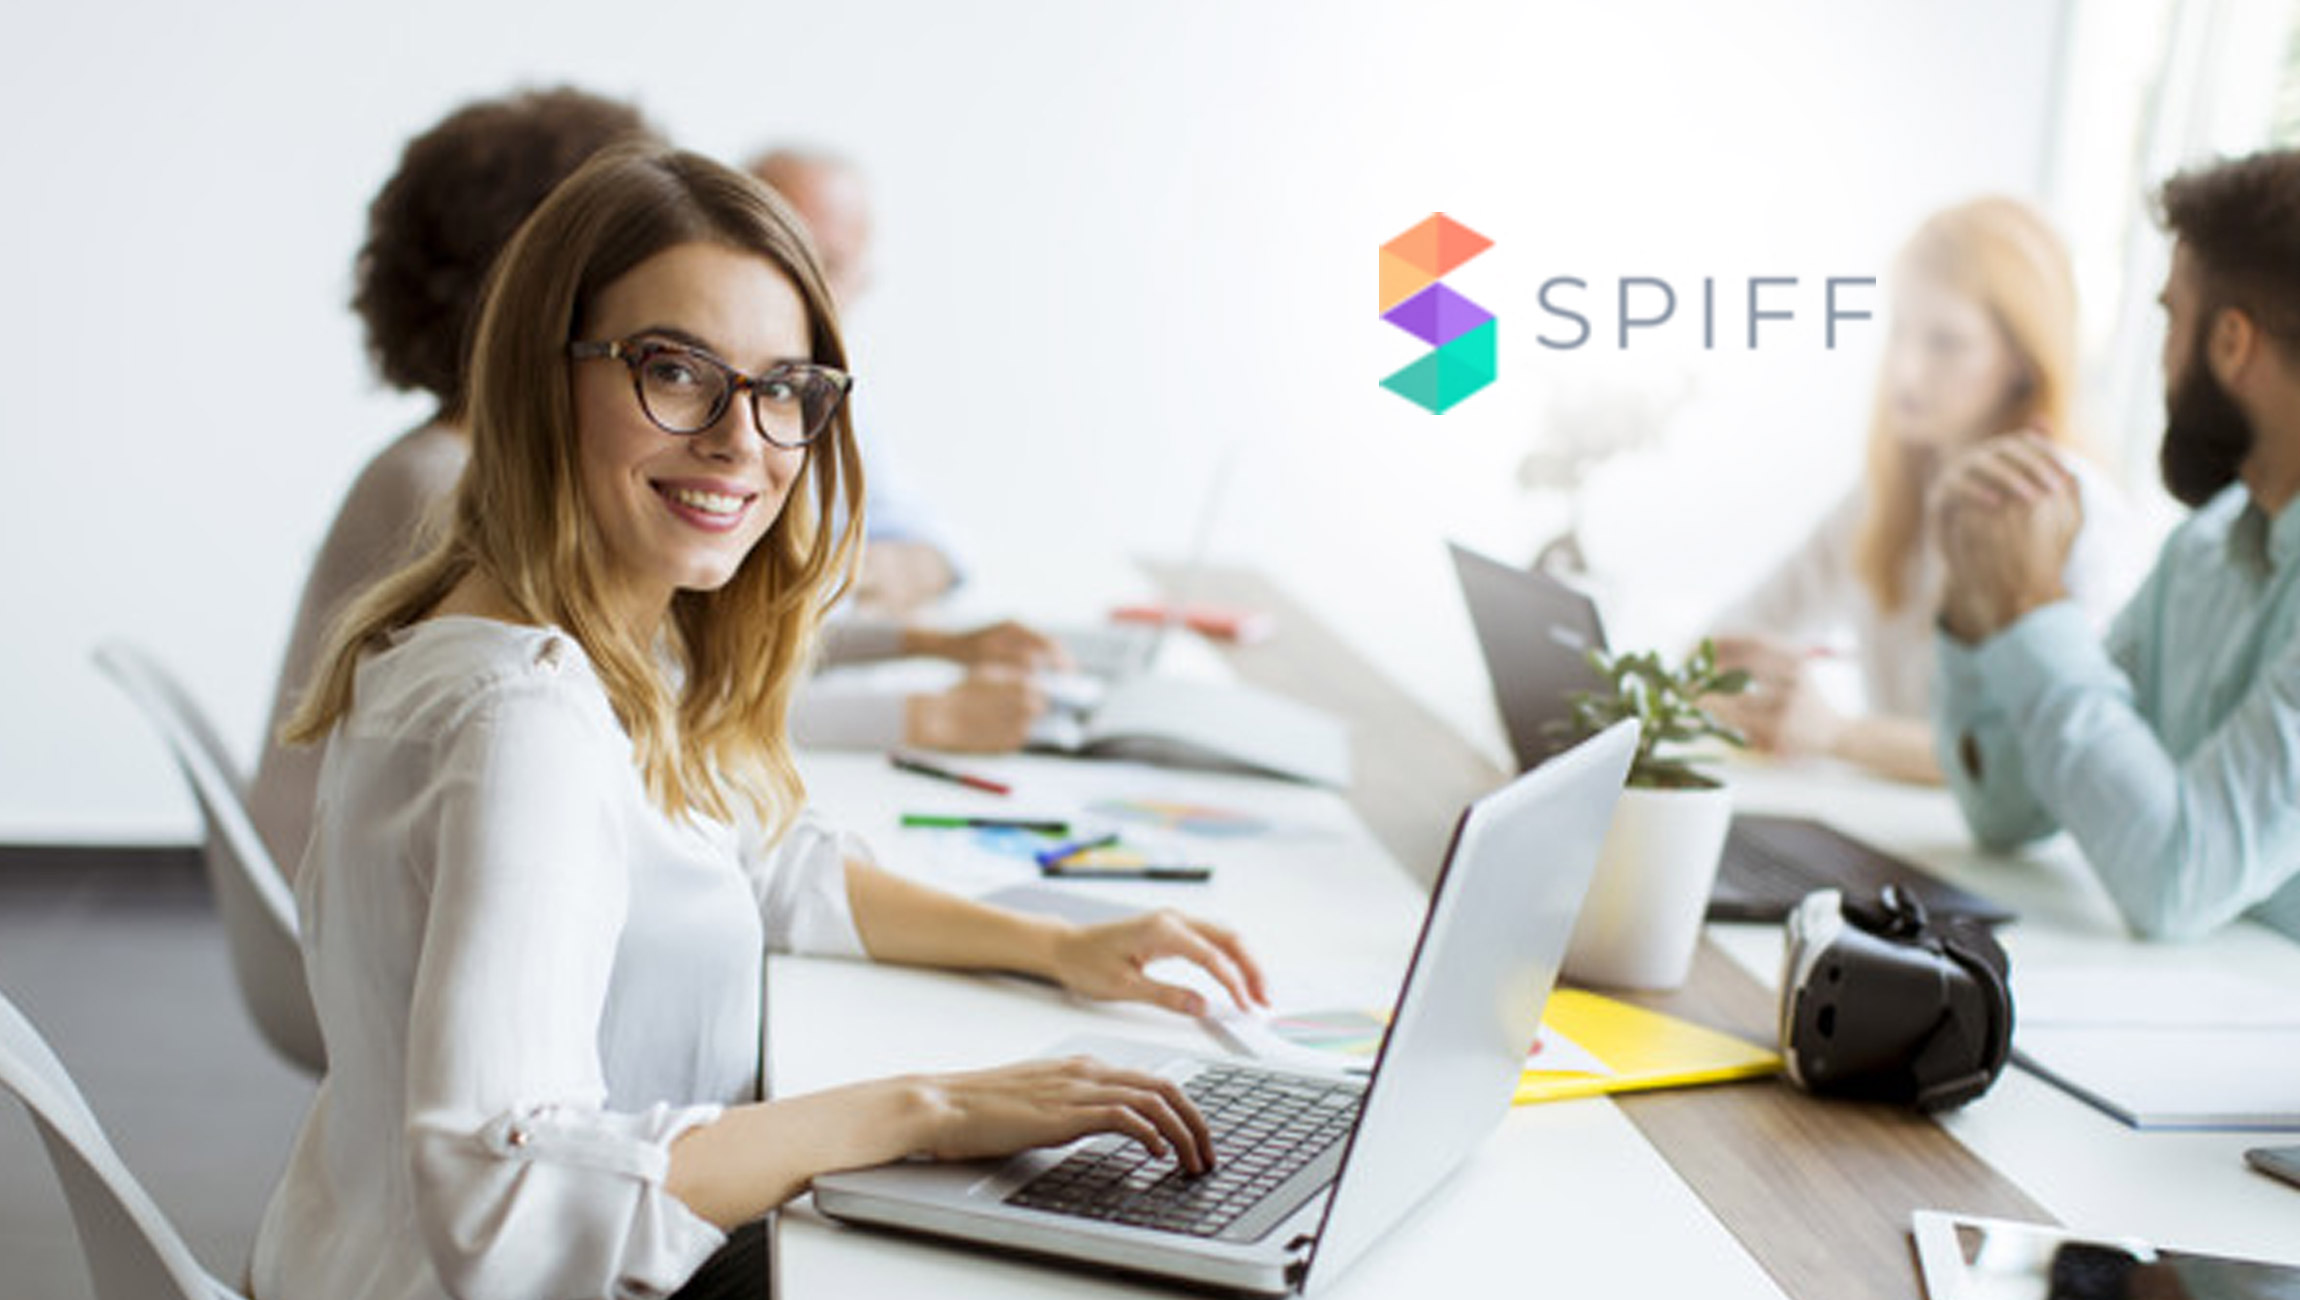 Spiff Retains Number One Ranking in G2’s Spring 2022 Sales Compensation Software Report